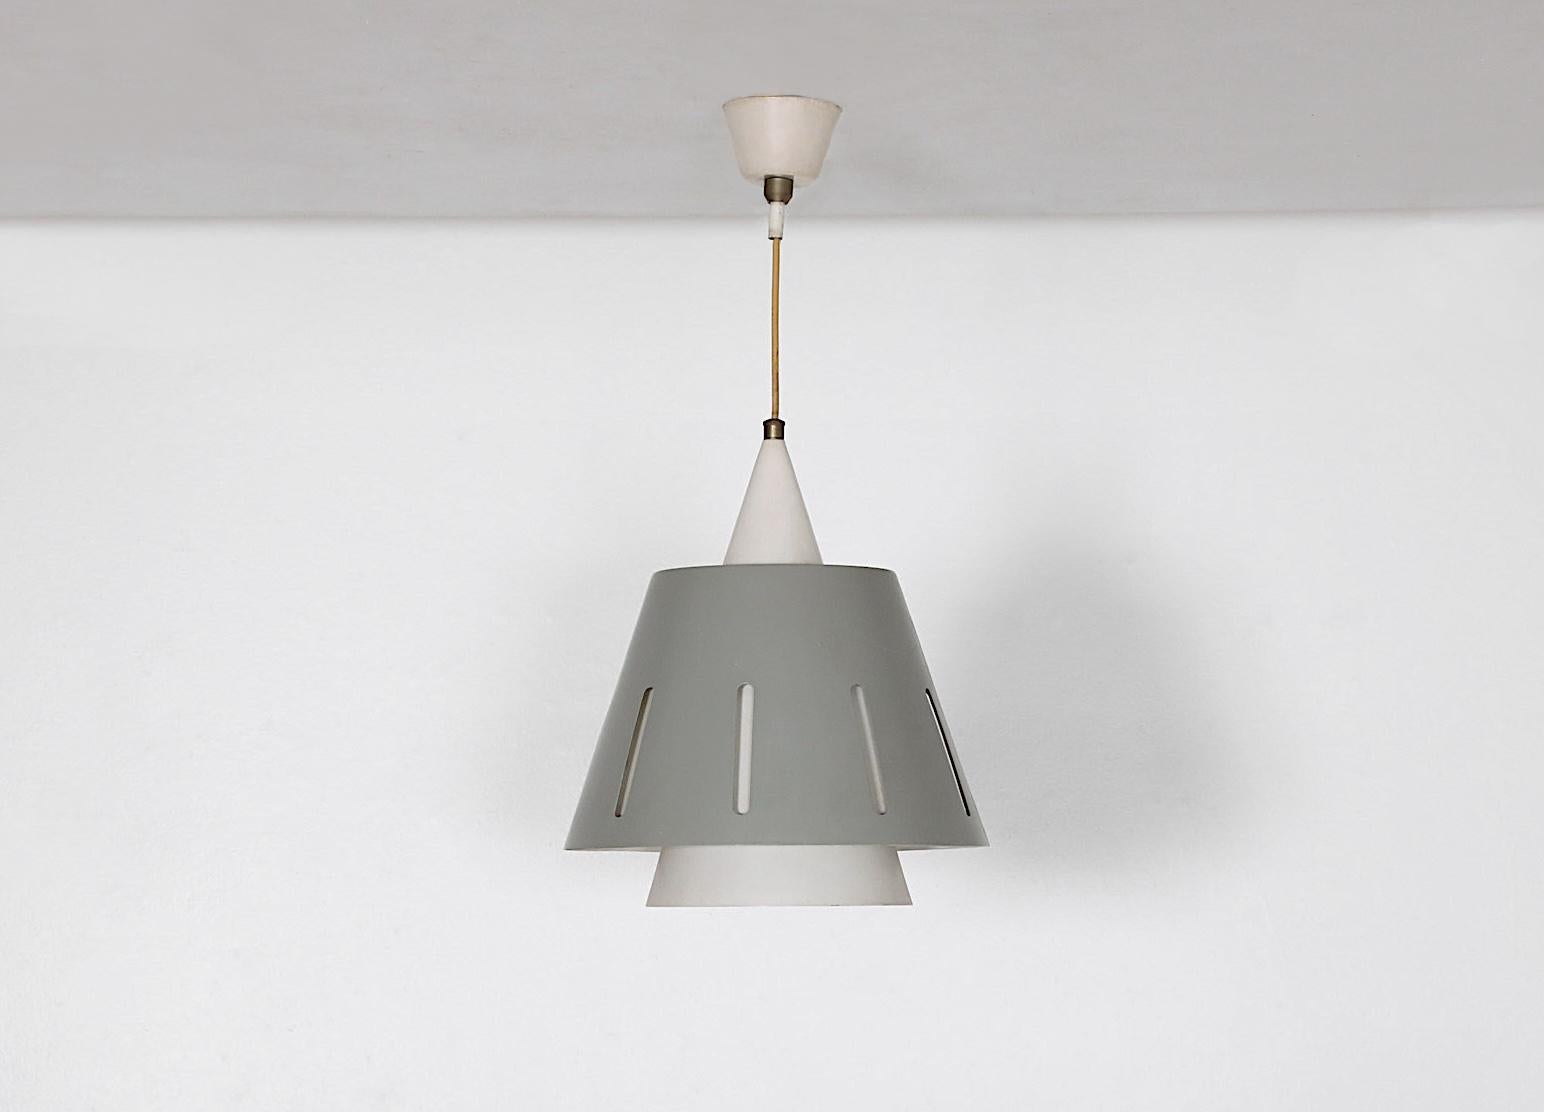 Vintage 'Zonneserie' or 'Sun Series' ceiling pendant by Herman Busquet for Hala Zeist, 1950s. Gray enameled metal outer shade and bone white metal interior.  In original condition with age appropriate wear including some scratching consistent with